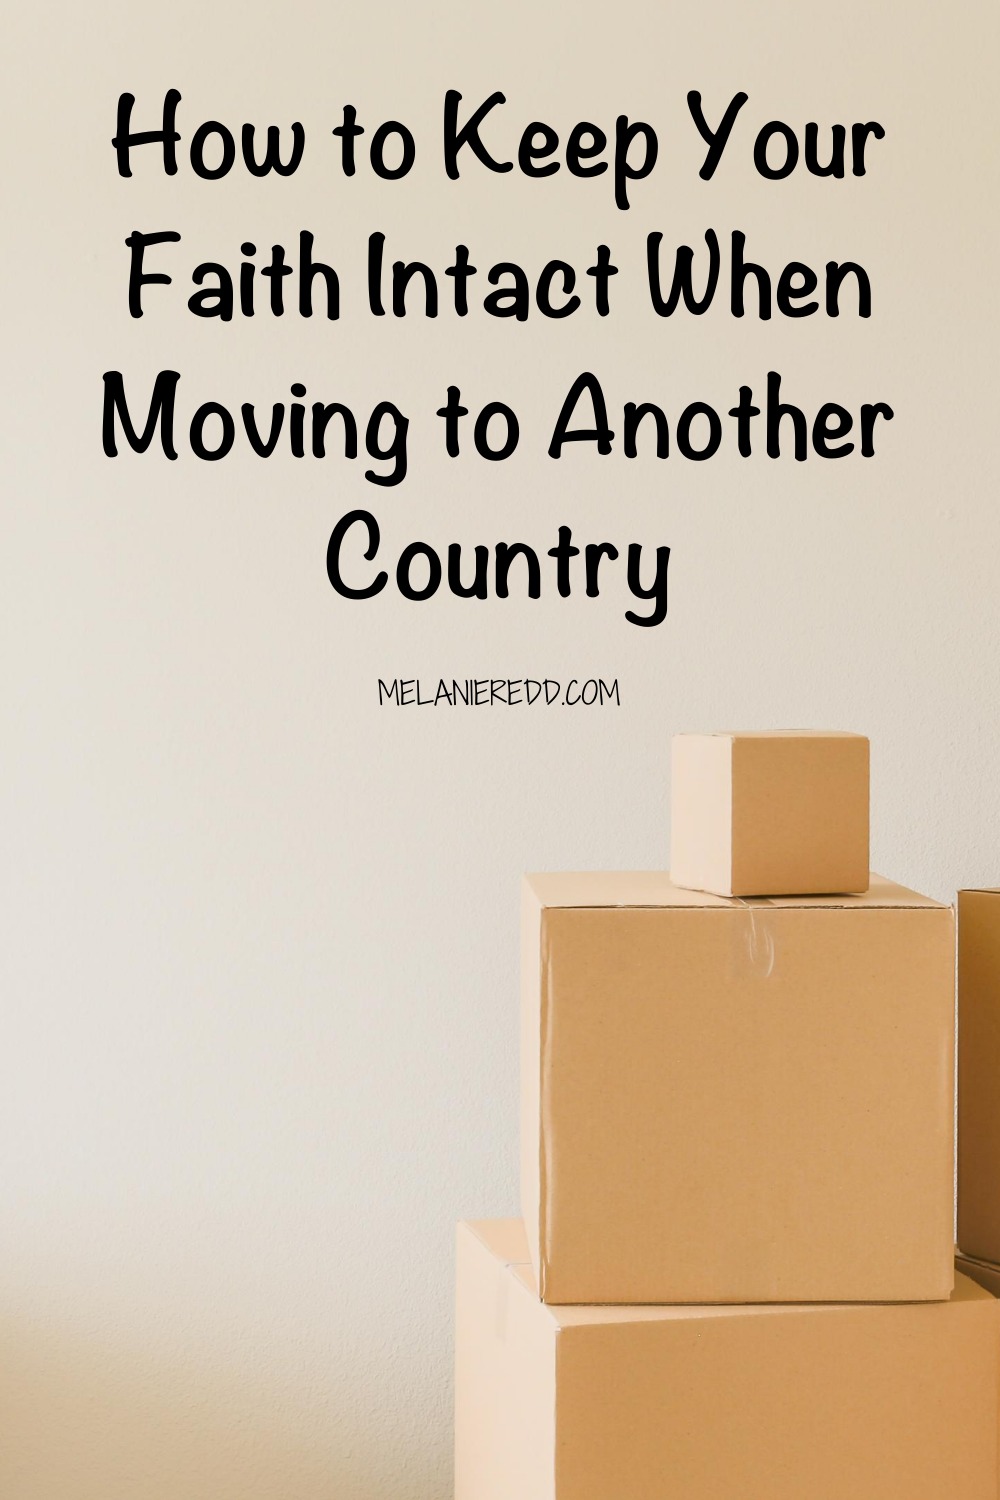 Moving to a new place can be an adventure and a challenge. Here is how to keep your faith instact when moving to another country.